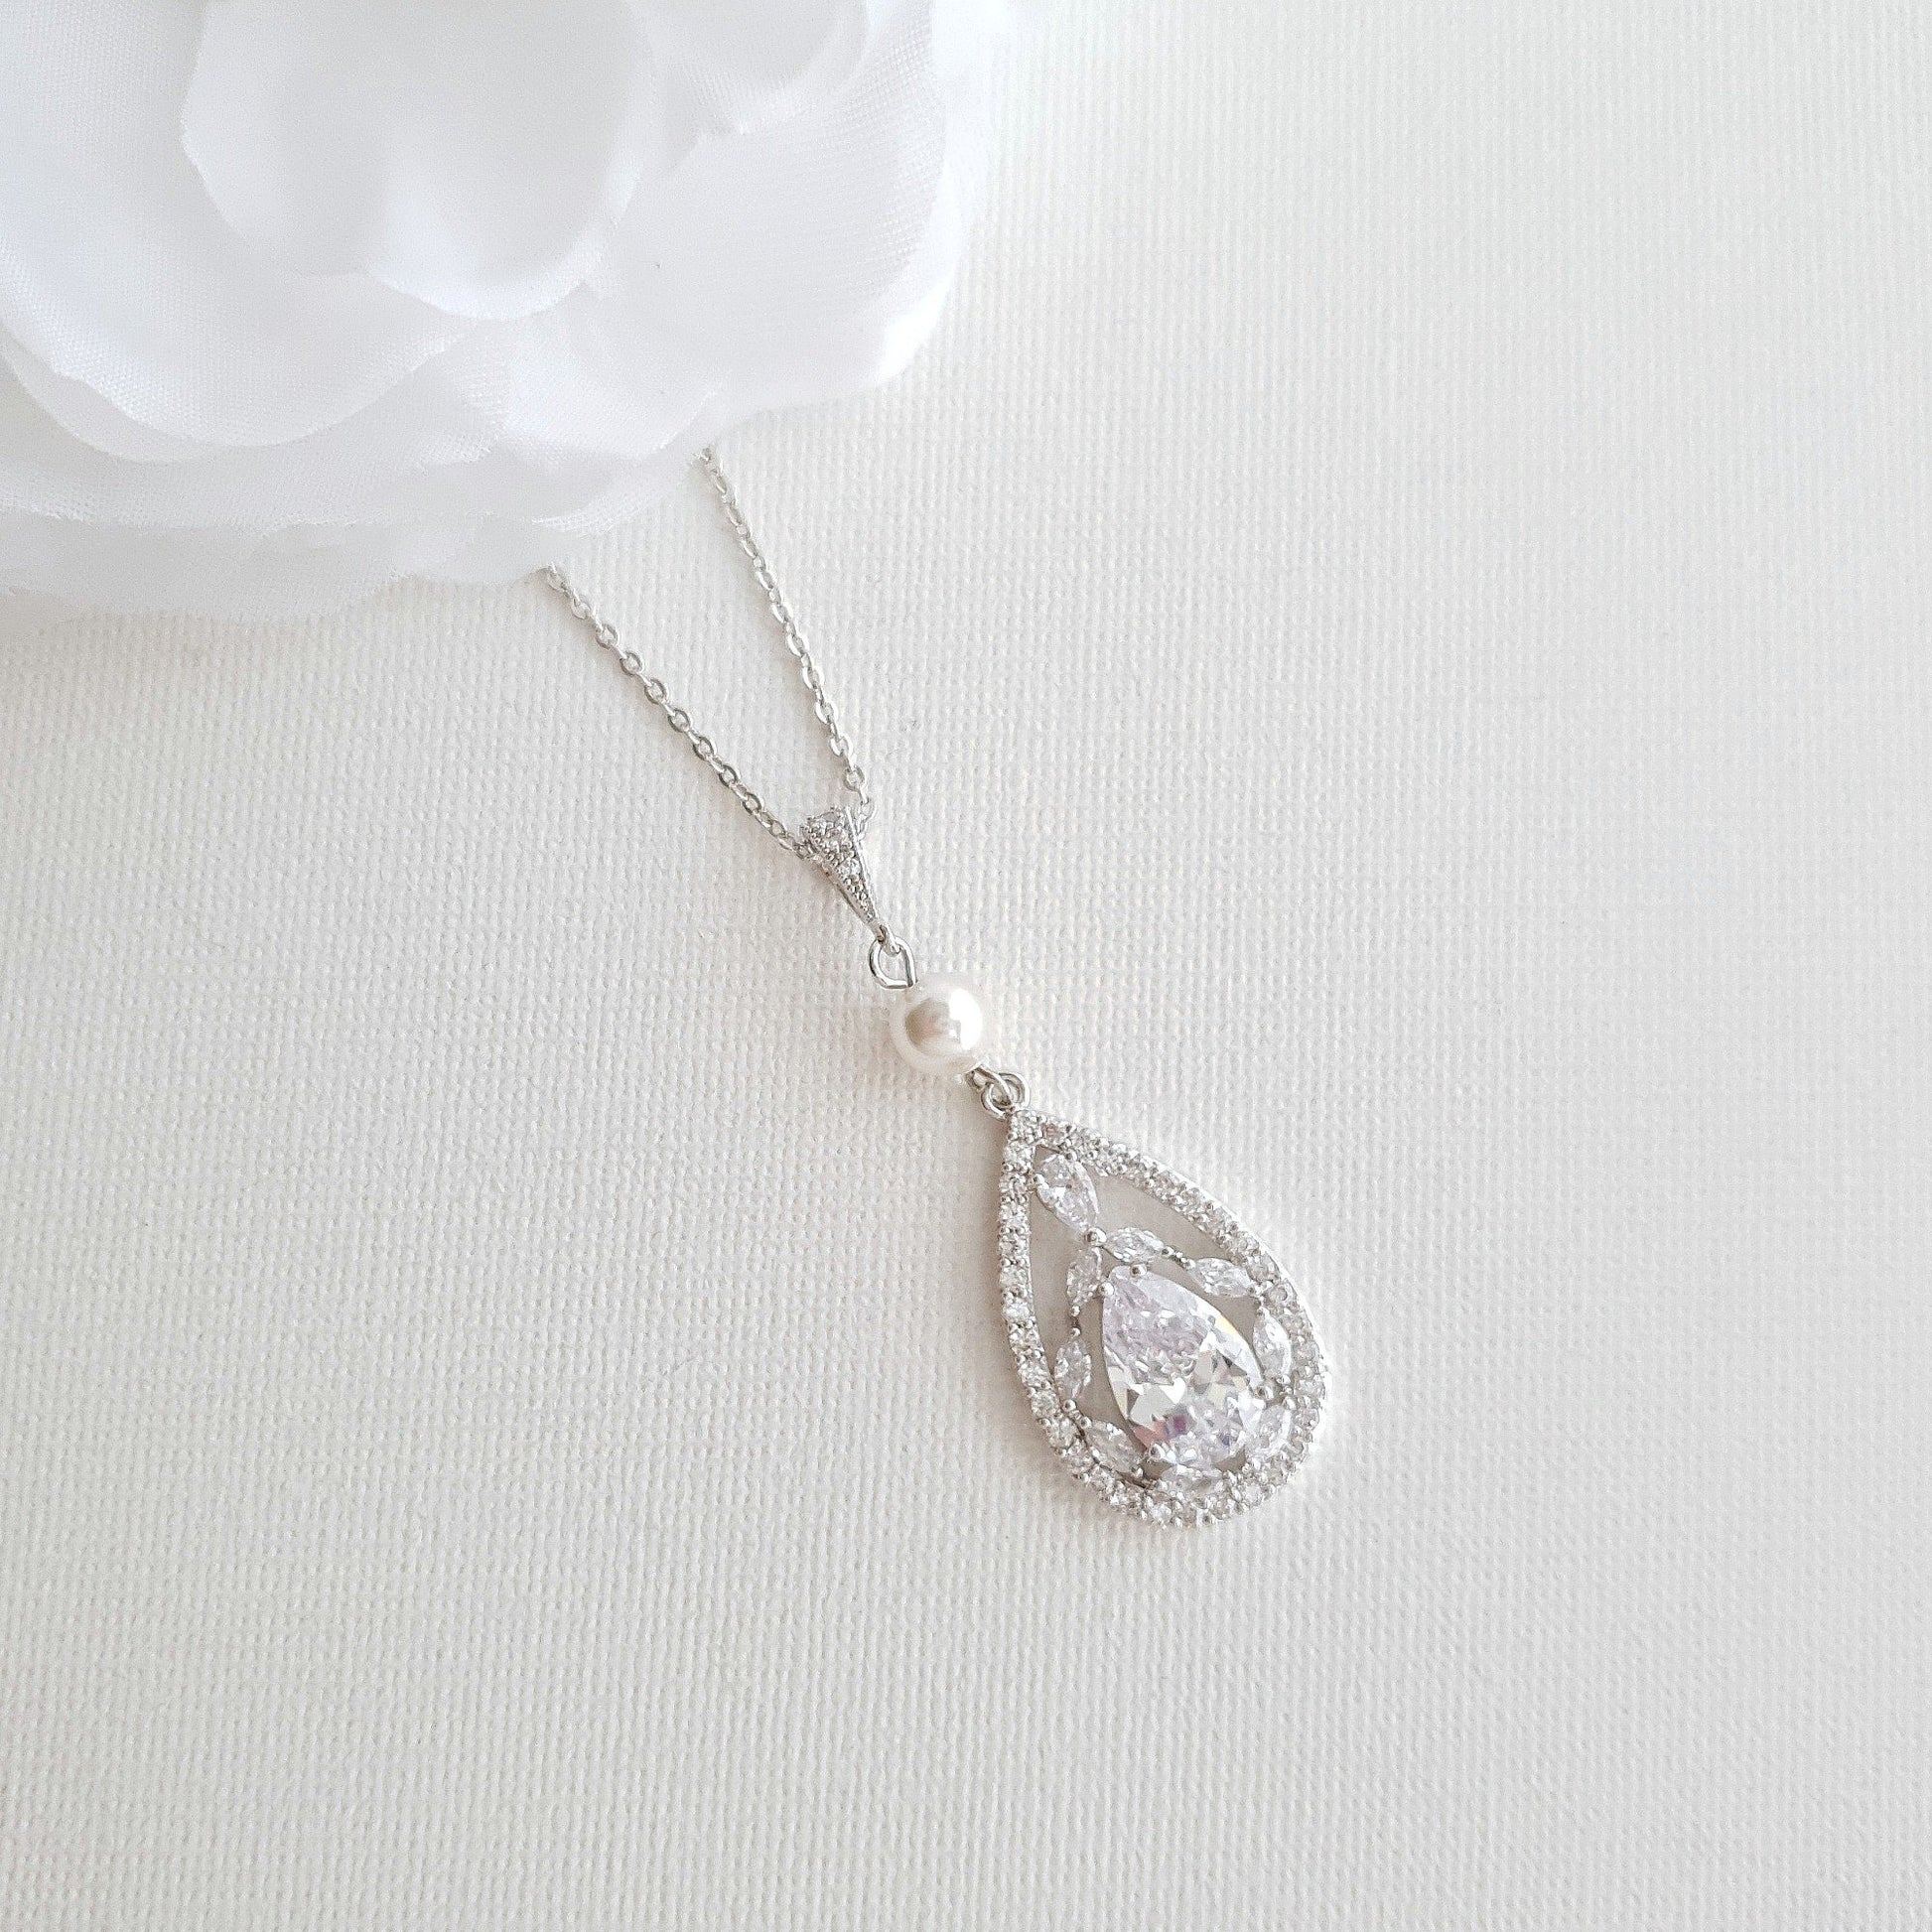 Bridal Pendant Necklace with Teardrop CZ Crystals-Esther - PoetryDesigns